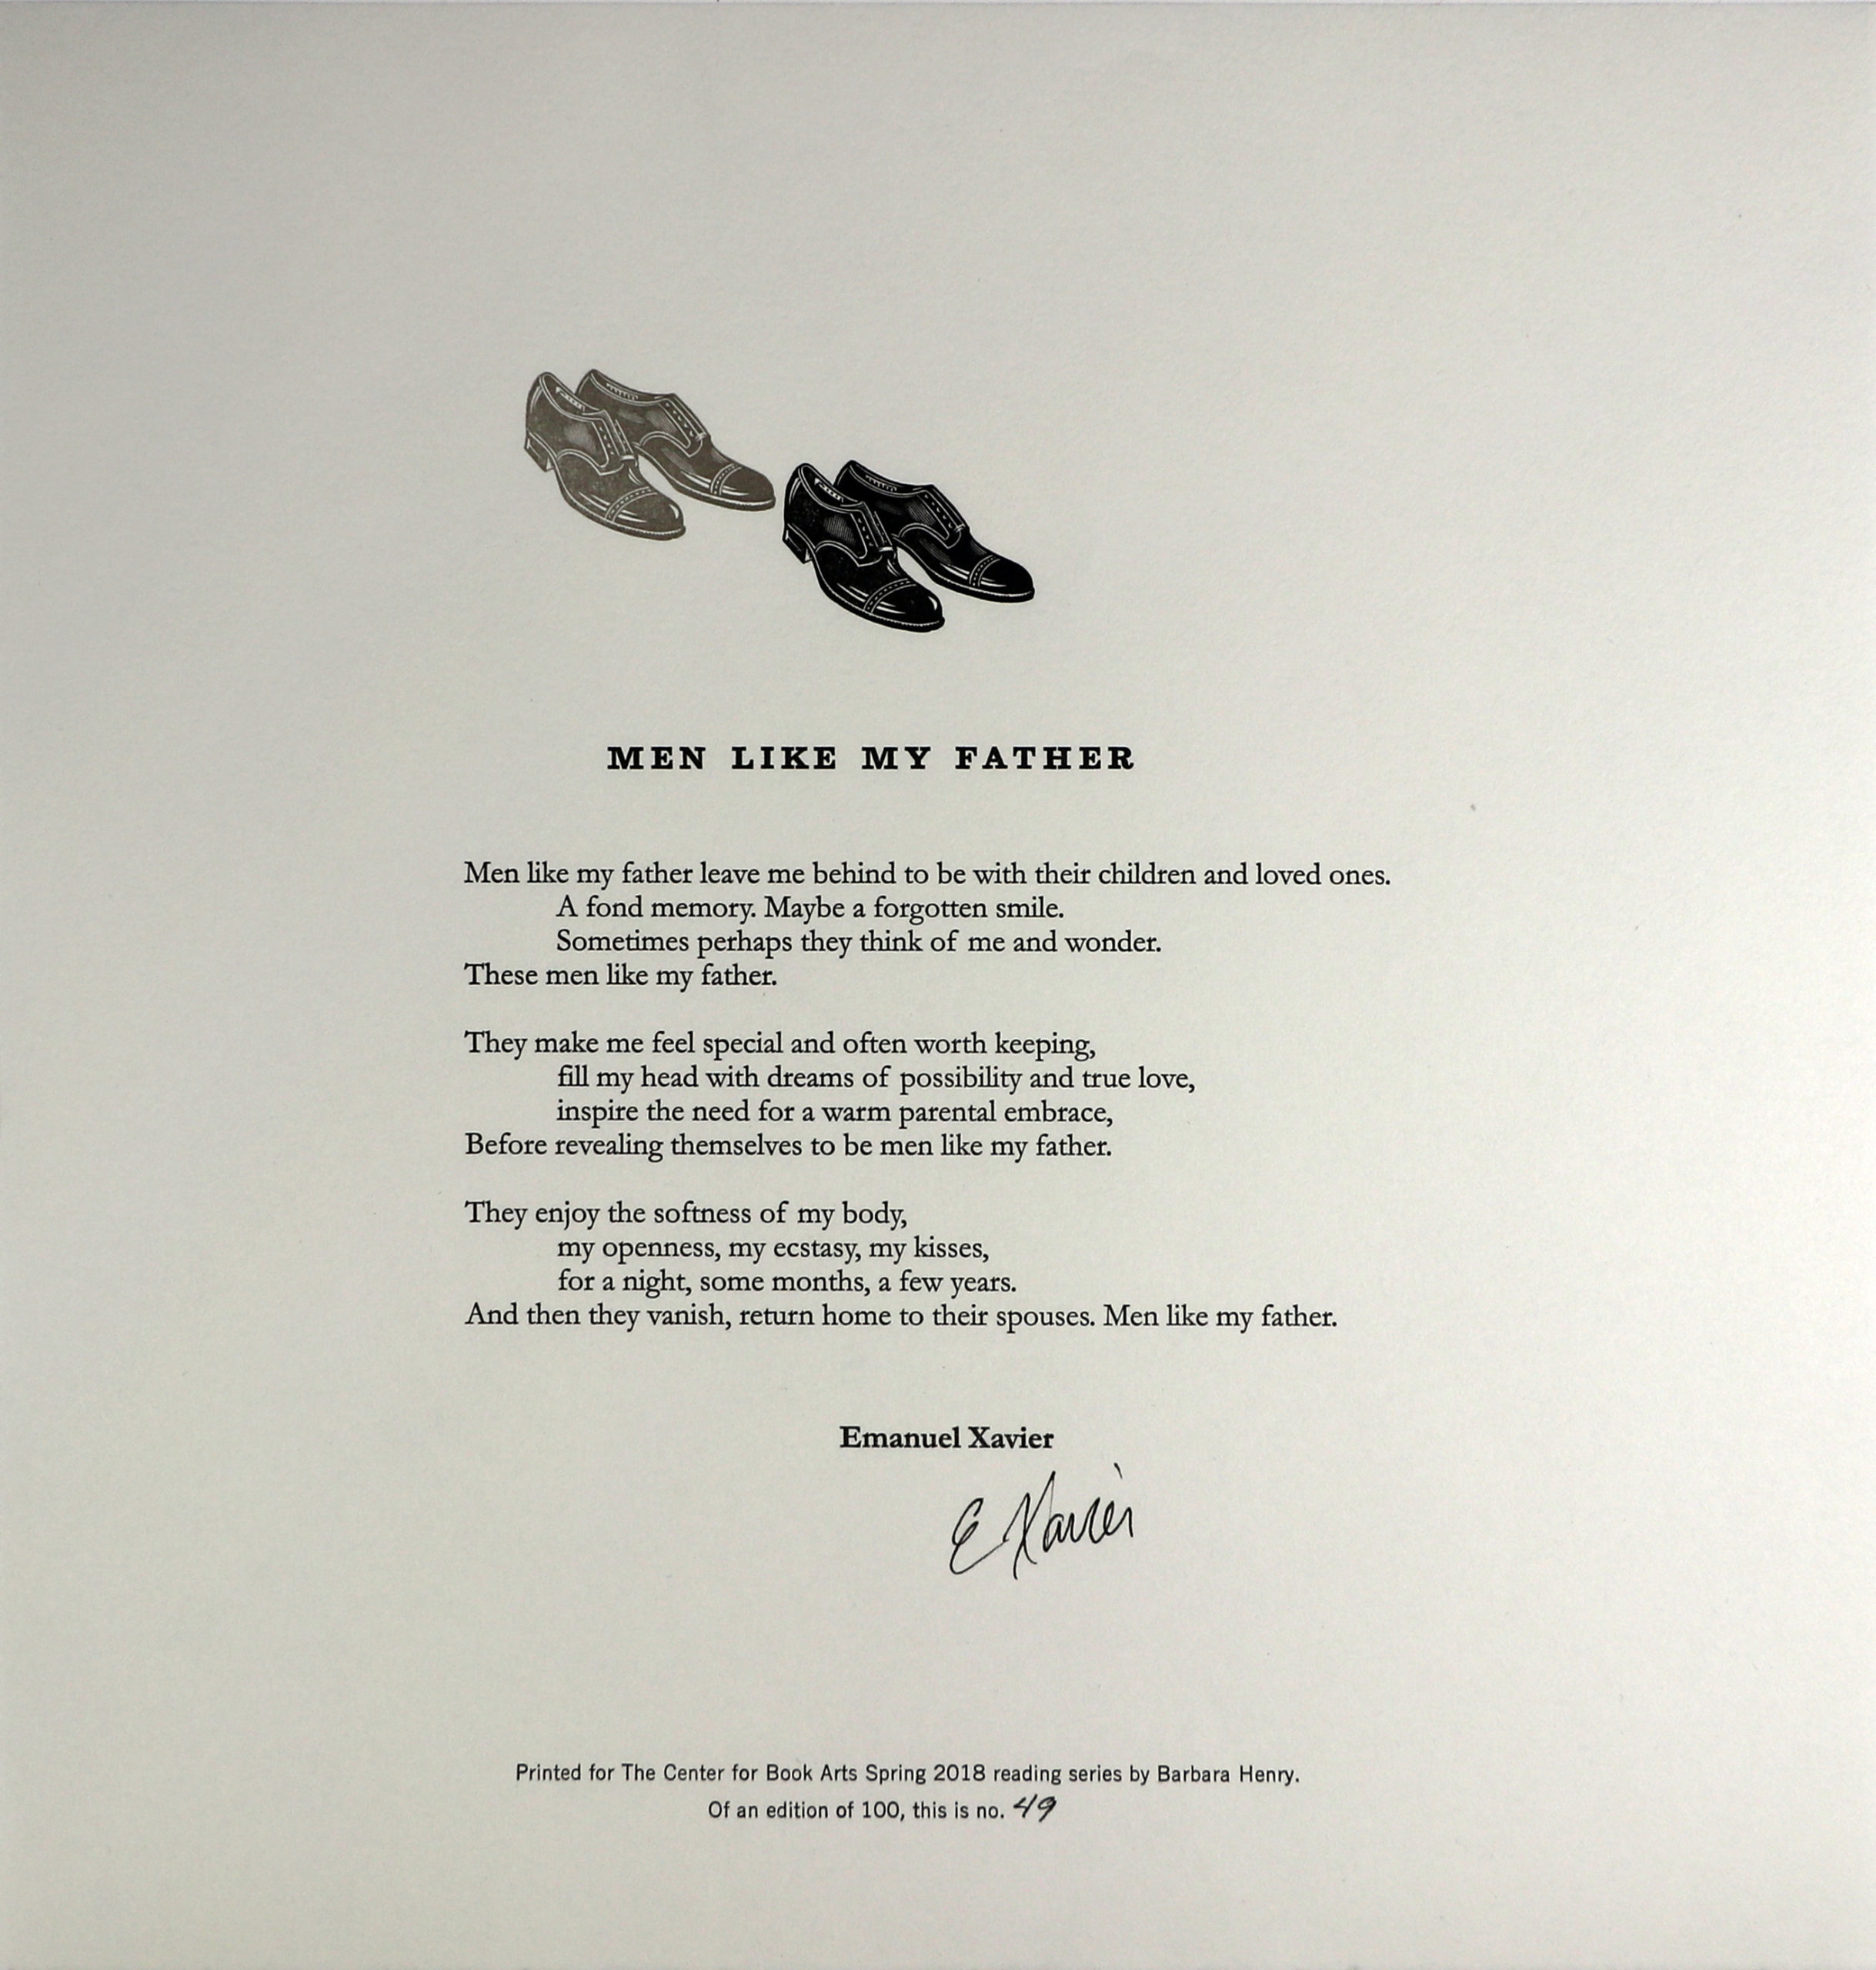 Letterpress printed broadside on white paper with two pairs of dress shoes, one pair grey and the other black.